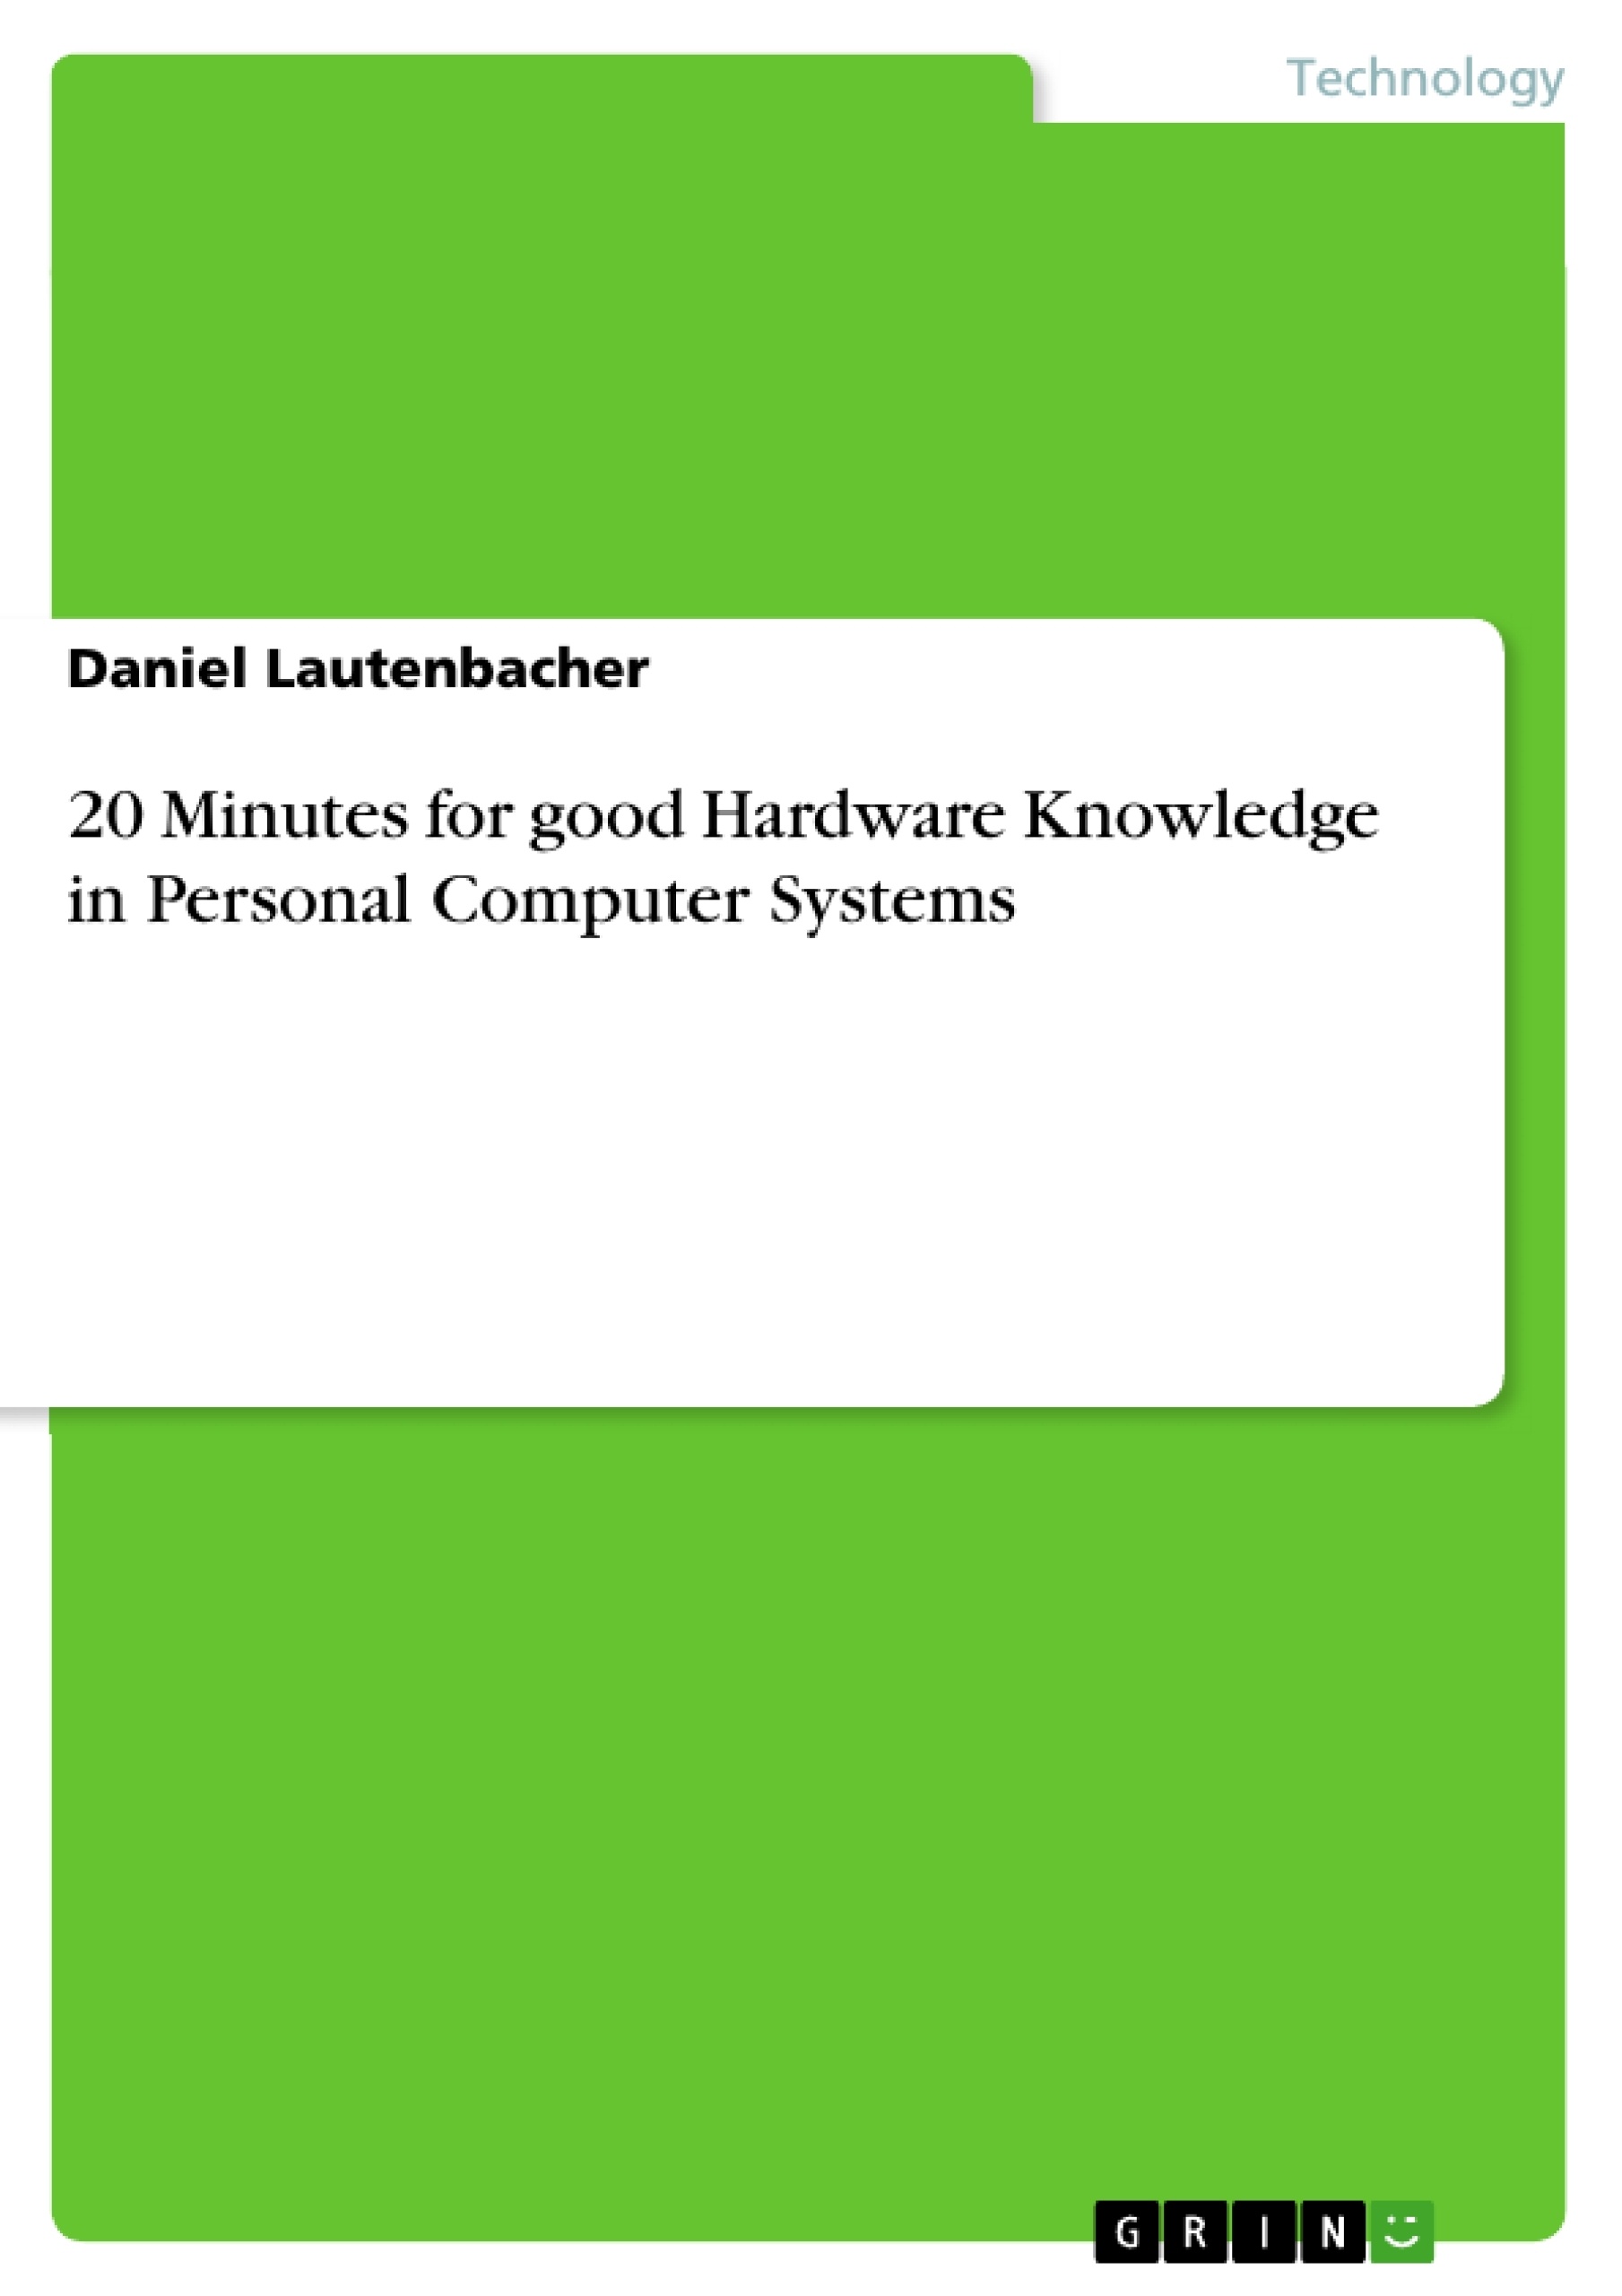 Title: 20 Minutes for good Hardware Knowledge in Personal Computer Systems